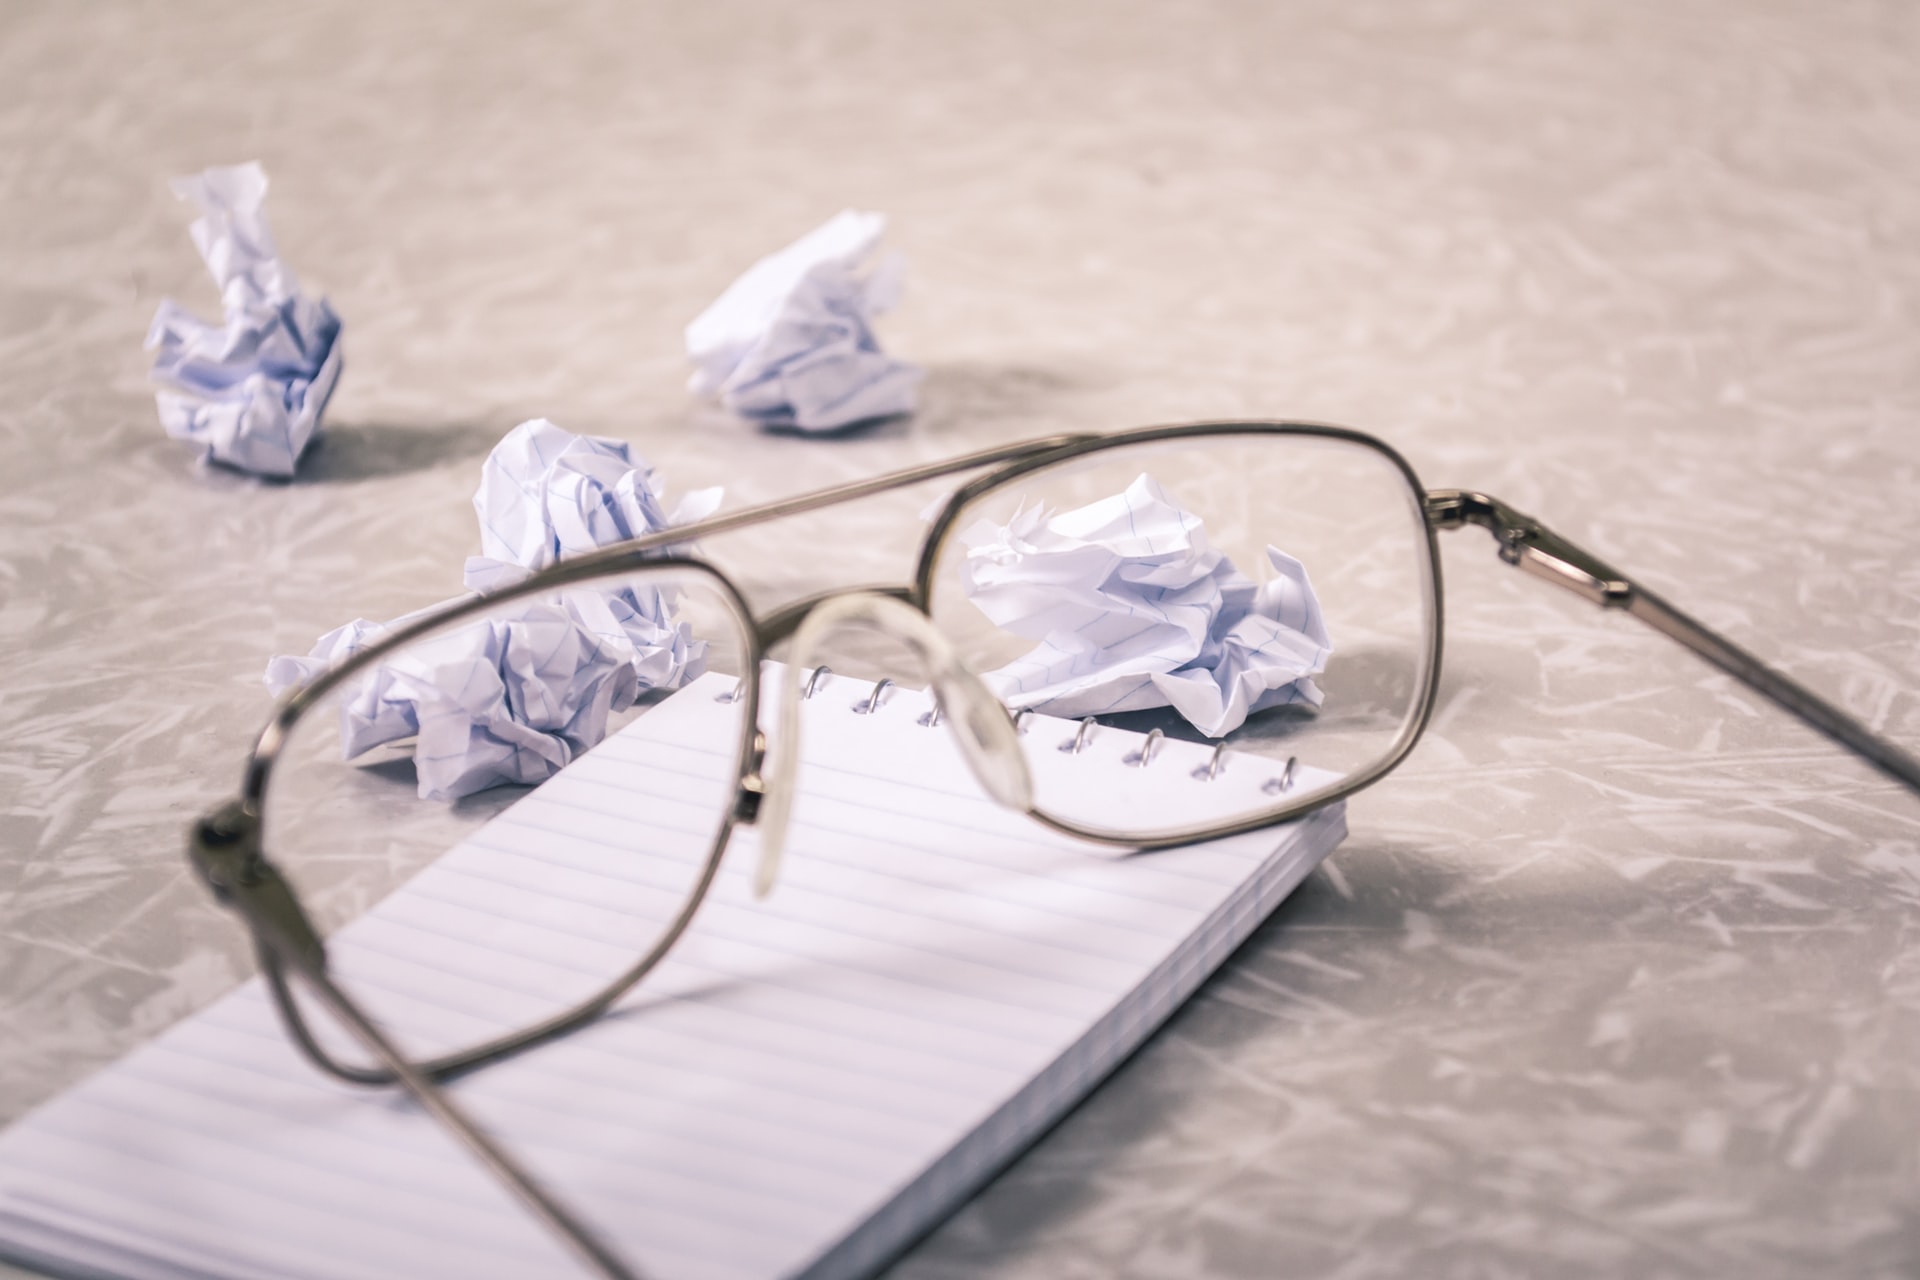 eyeglasses with notebook and crumpled paper